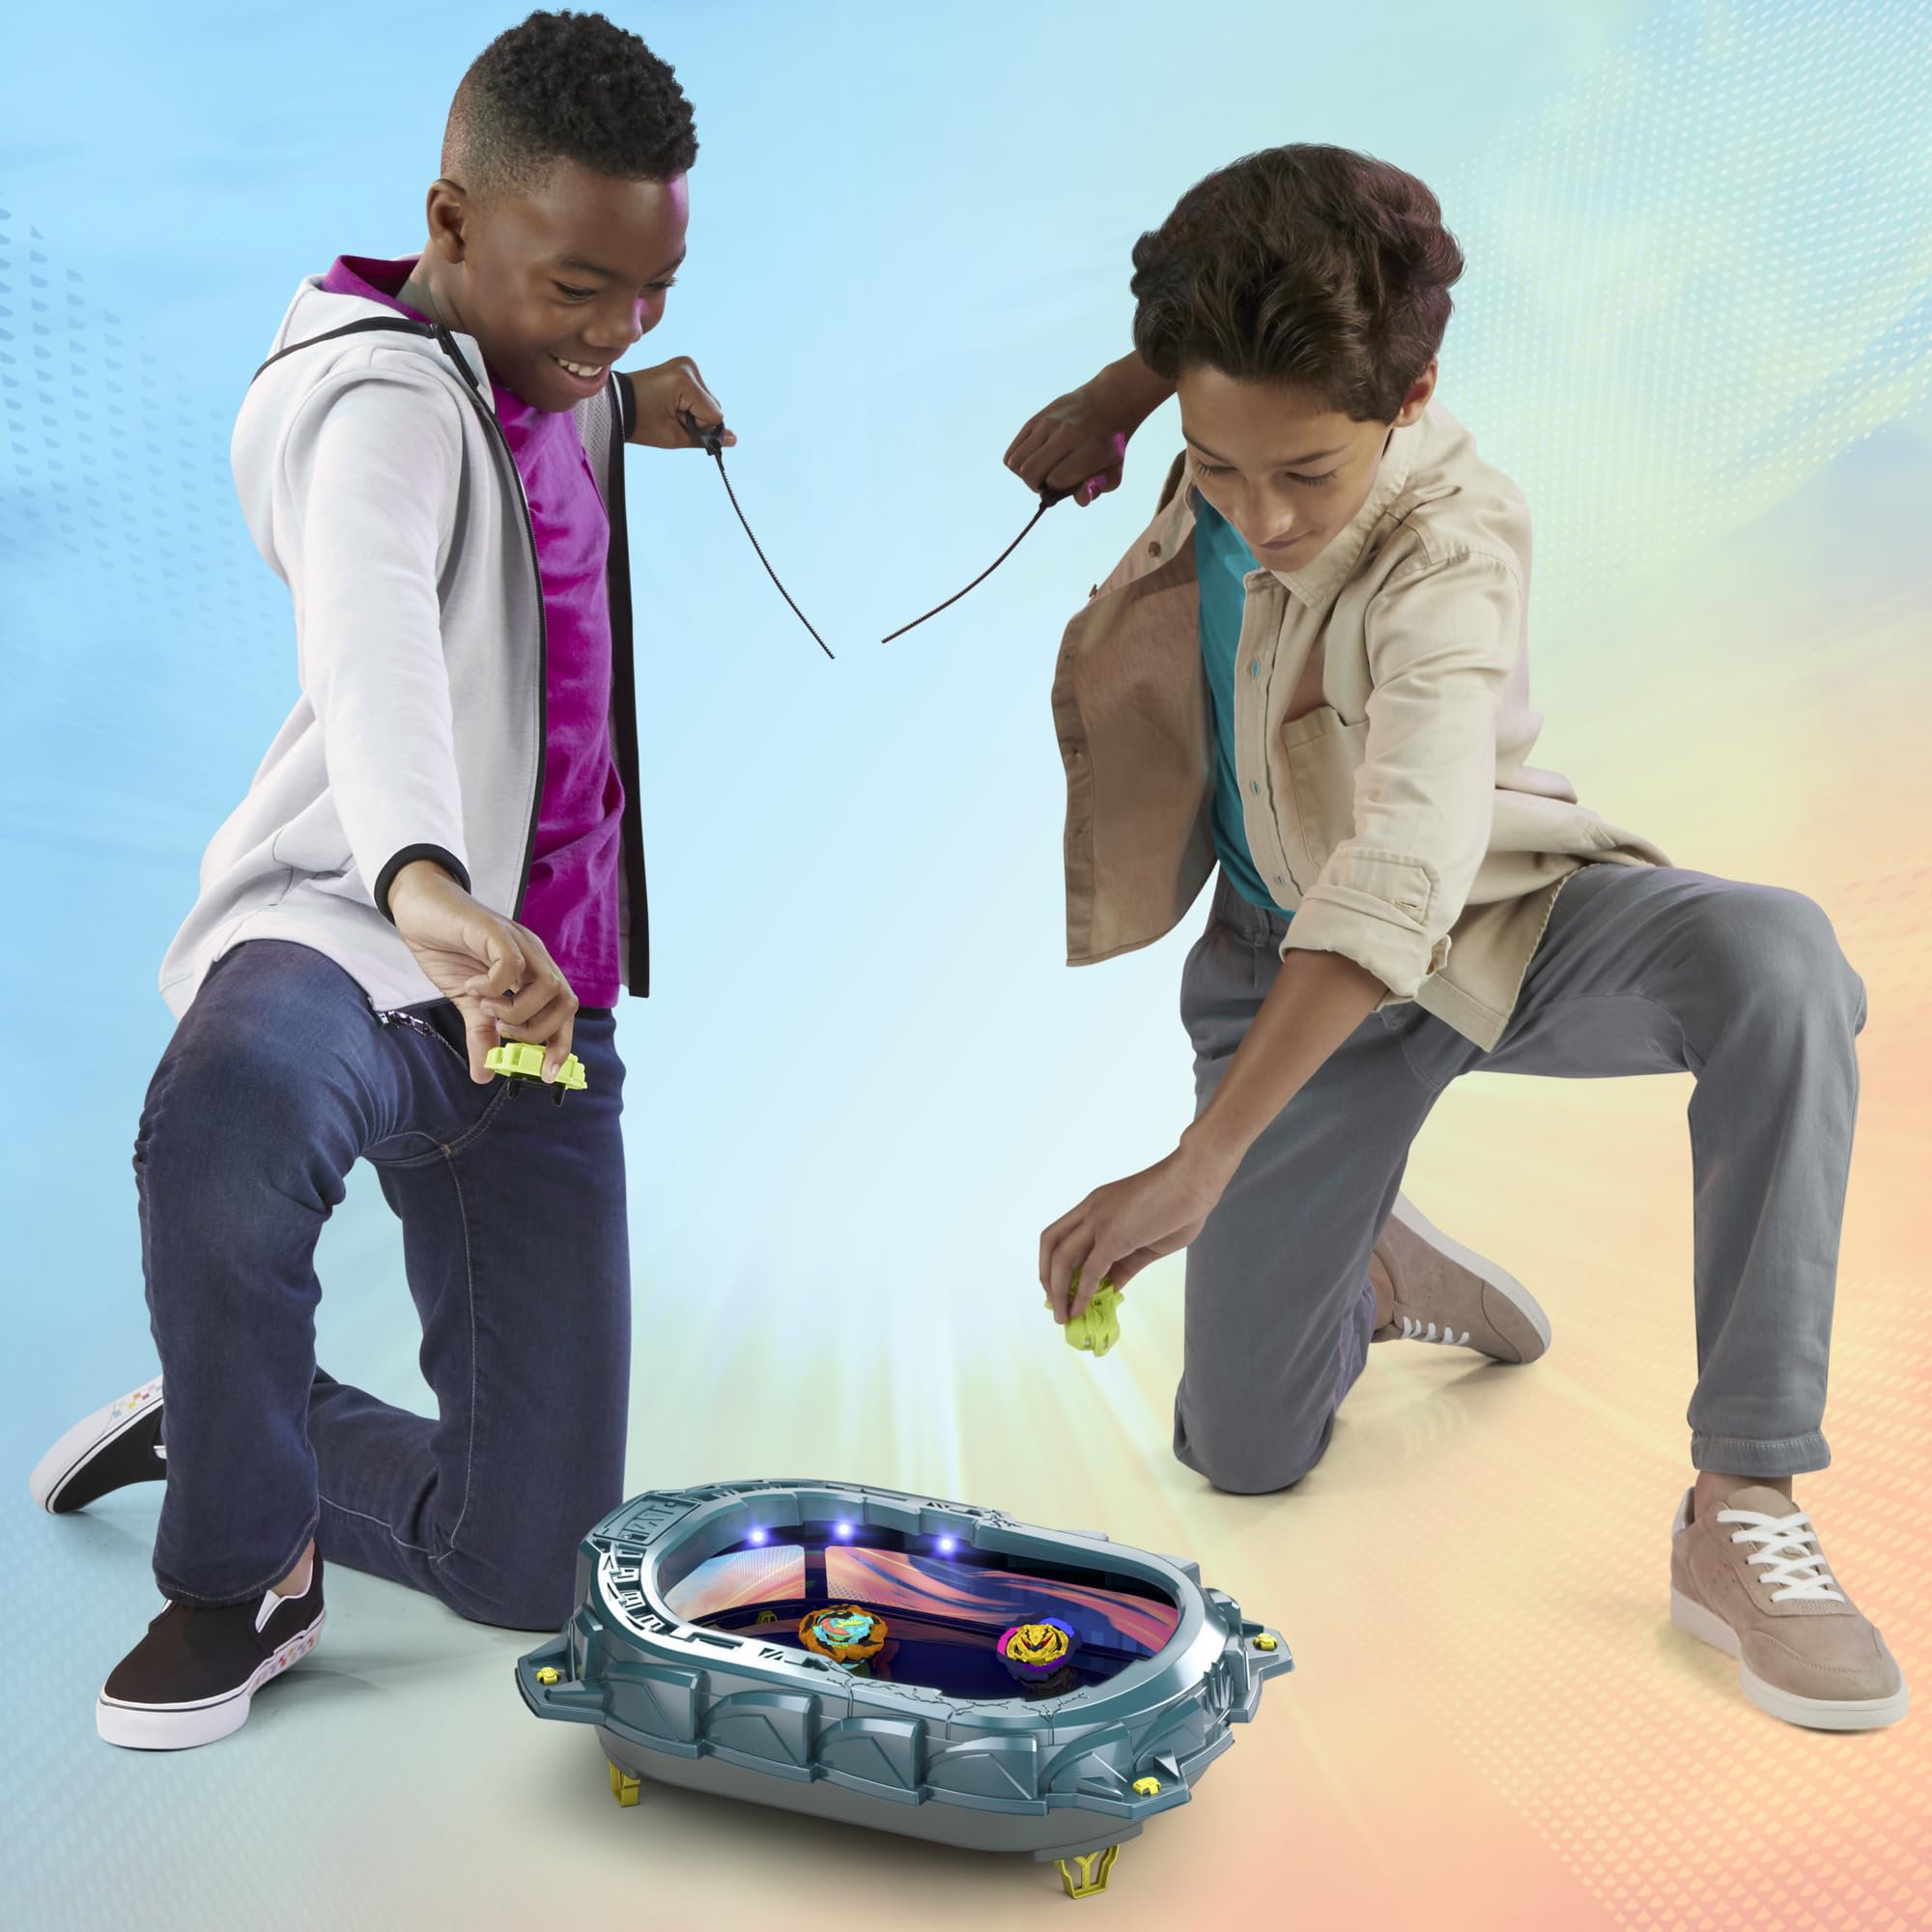 Beyblade Burst QuadStrike Light Ignite Battle Set Stadium, 2 Spinning Tops, and 2 Launchers, Toys for 8 Year Old Boys & Girls & Up (Amazon Exclusive)